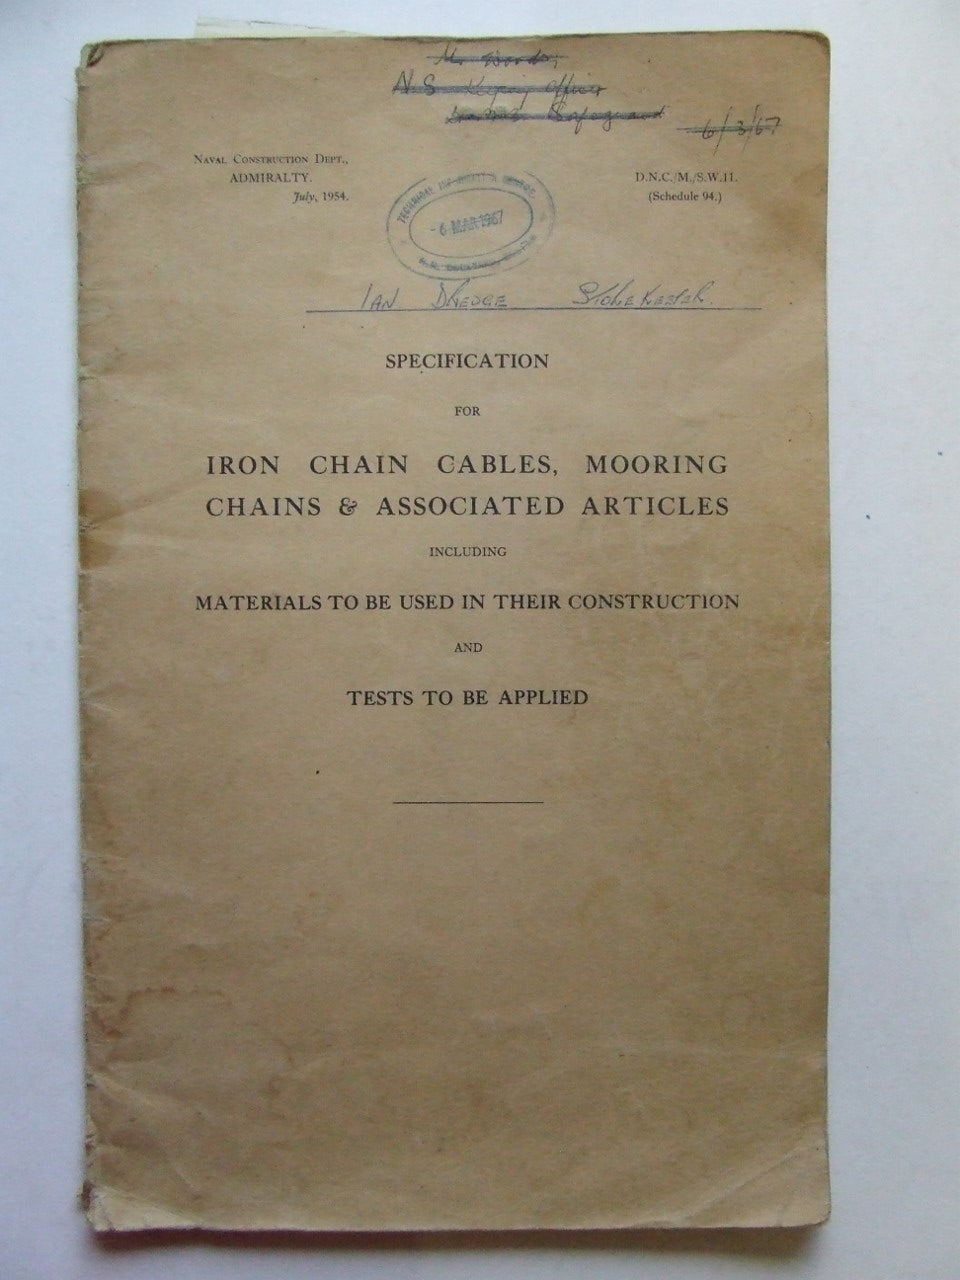 Specification for Iron Chain Cables, Mooring Chains & Associated Articles